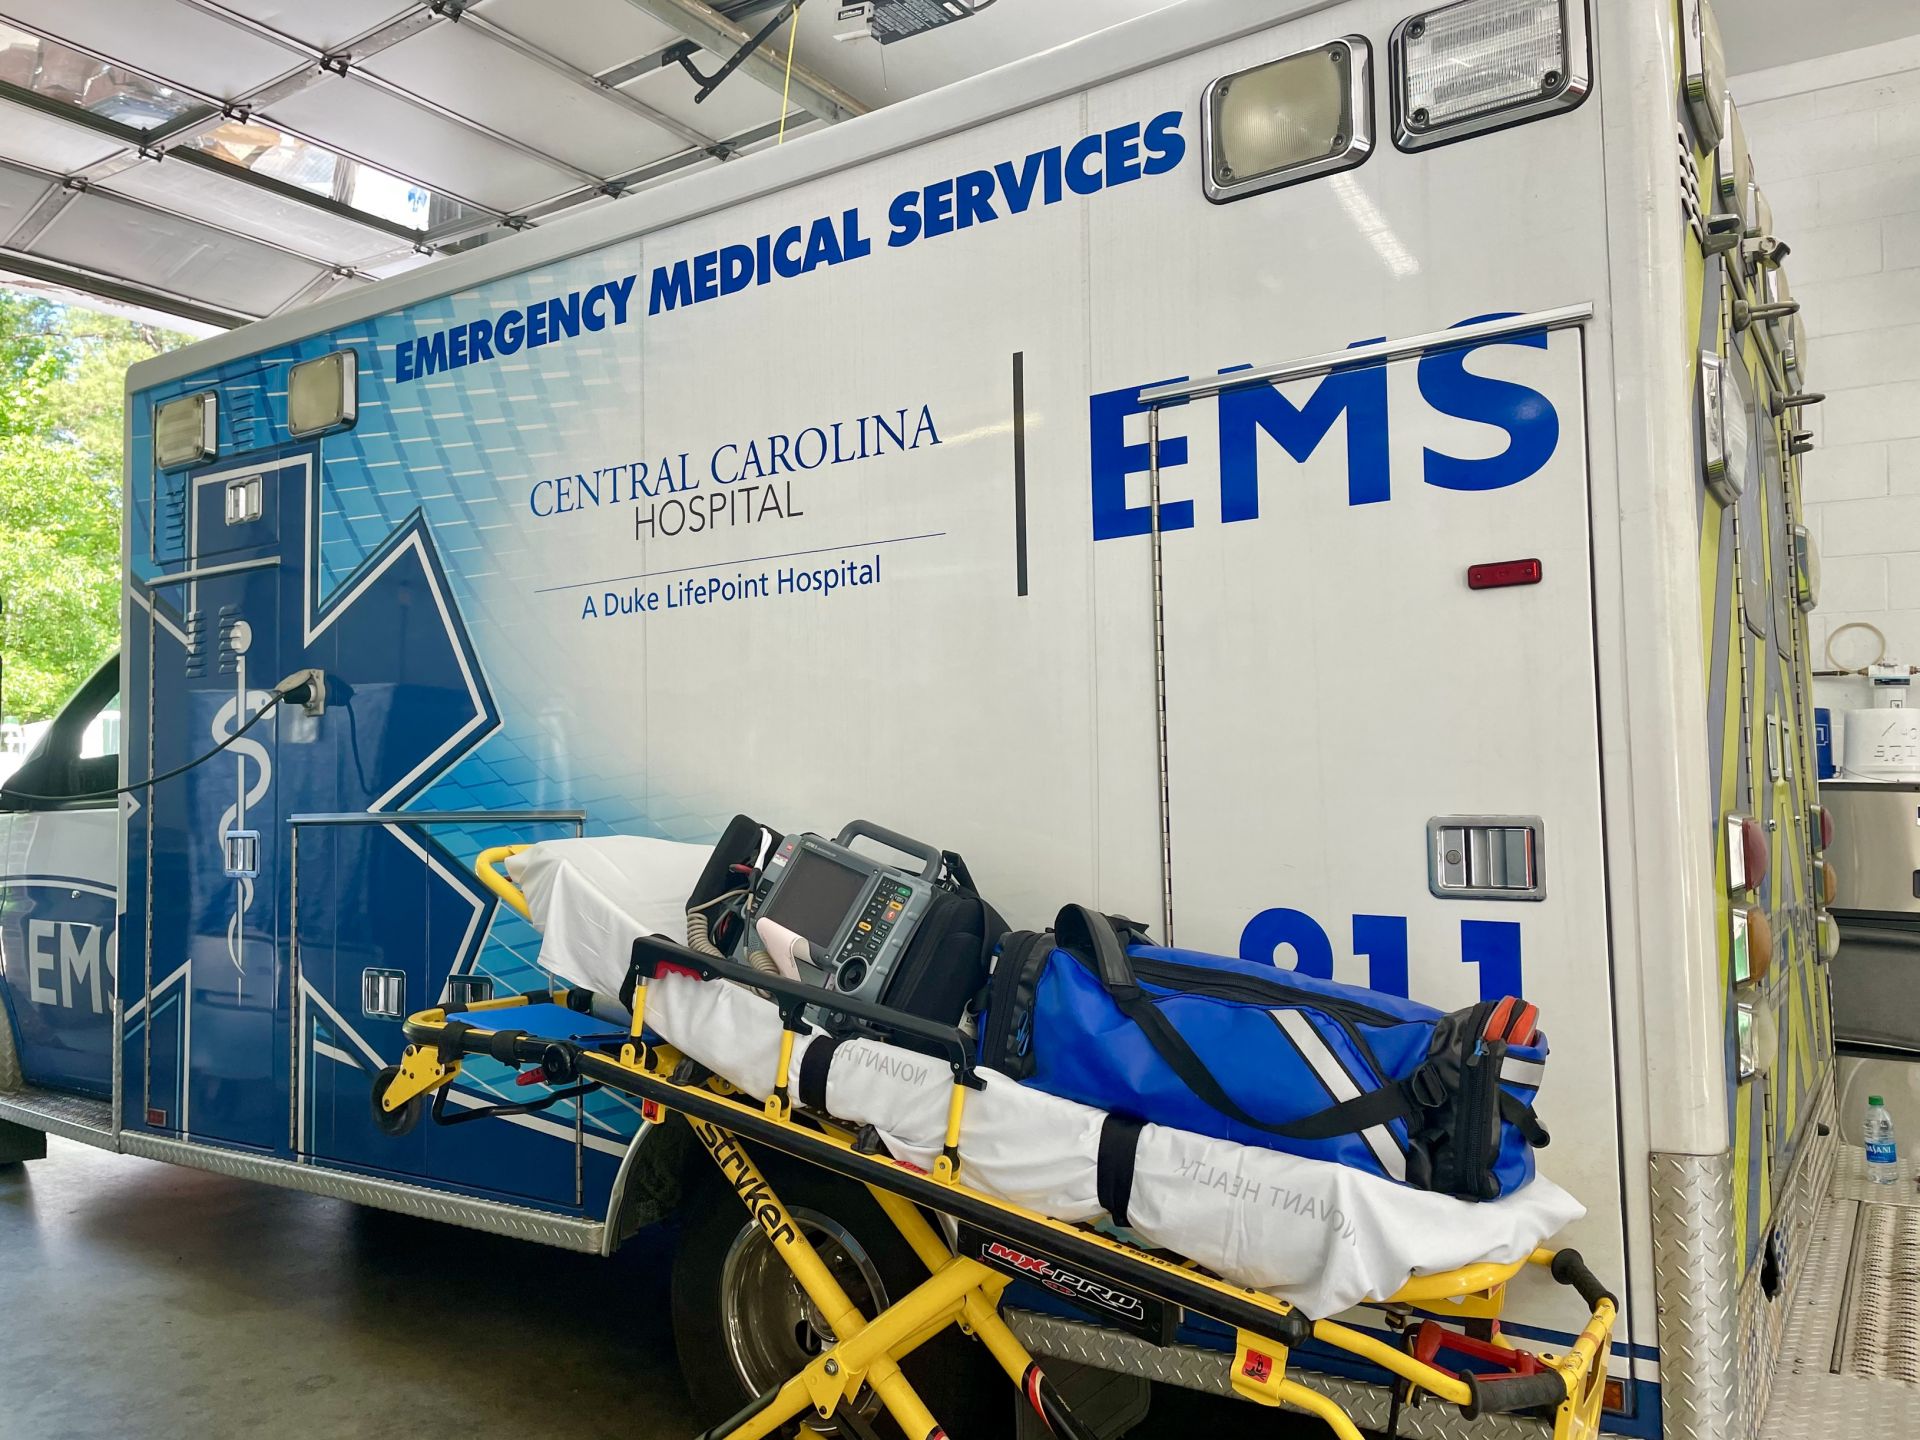 Recognizing Central Carolina EMS and 24-Year Partnership with Lee County